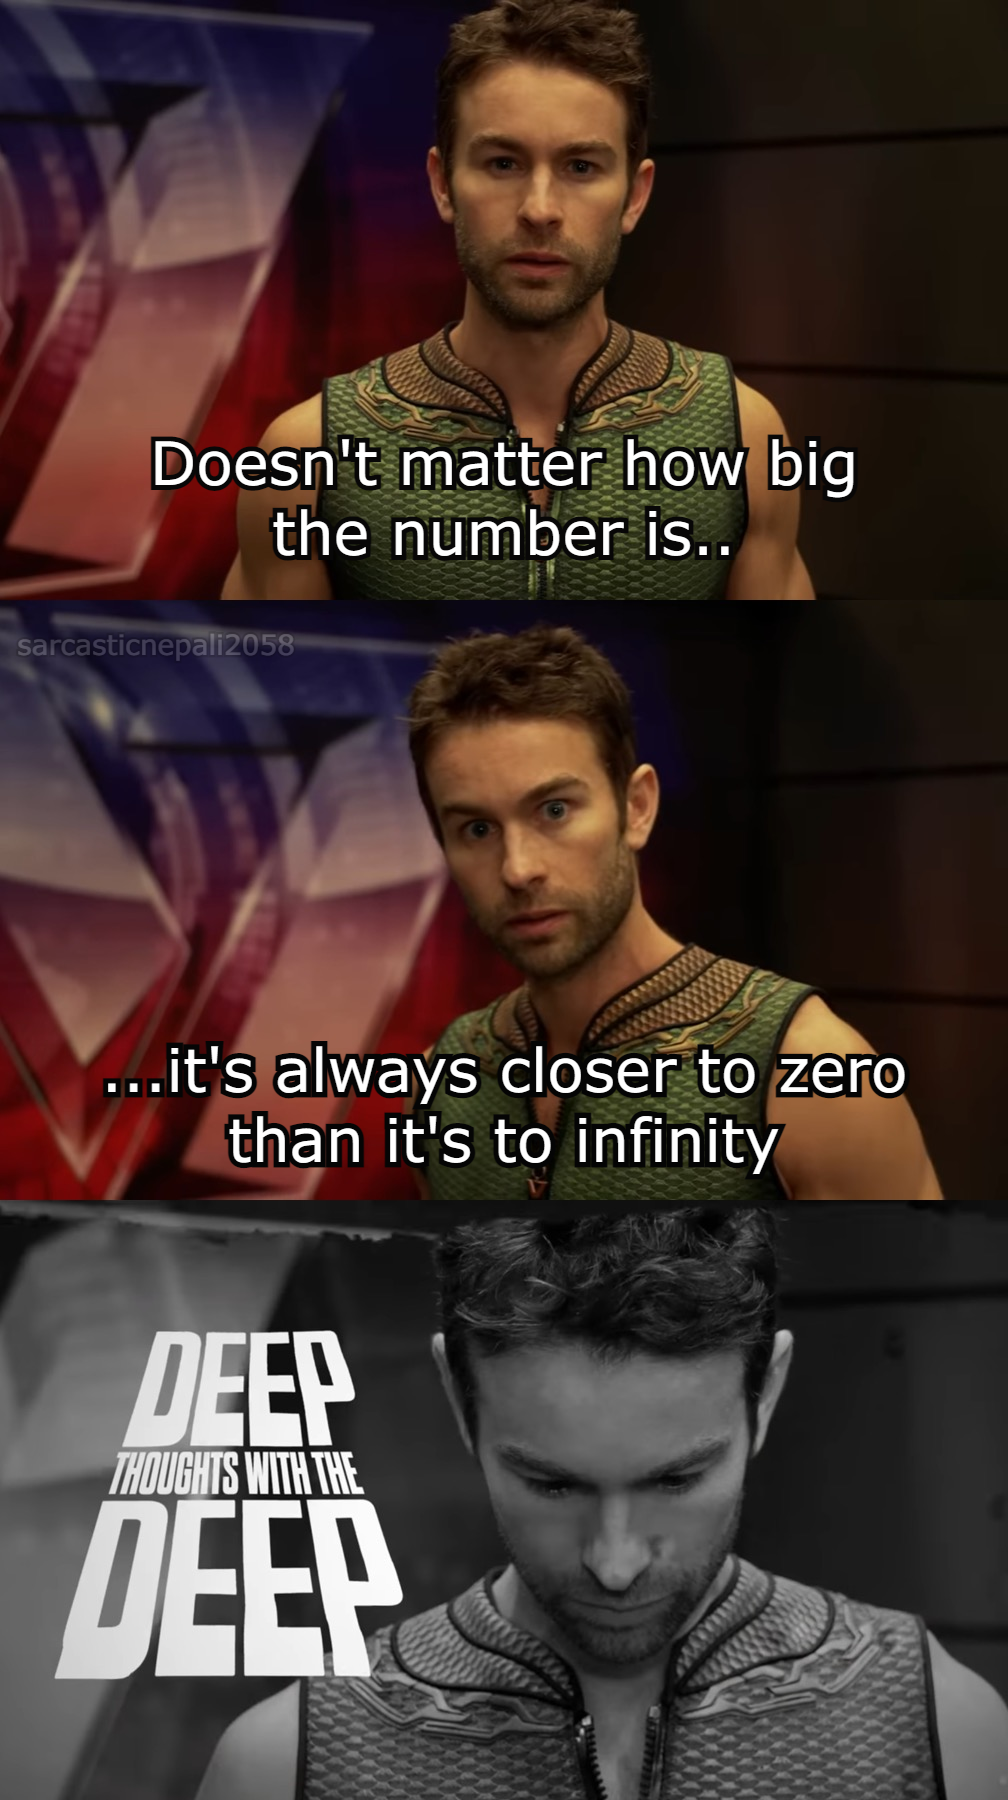 funny memes - deep memes - Doesn't matter how big the number is.. Cameropa2000 ...it's always closer to zero than it's to infinity Deep Thoughts With The Deep